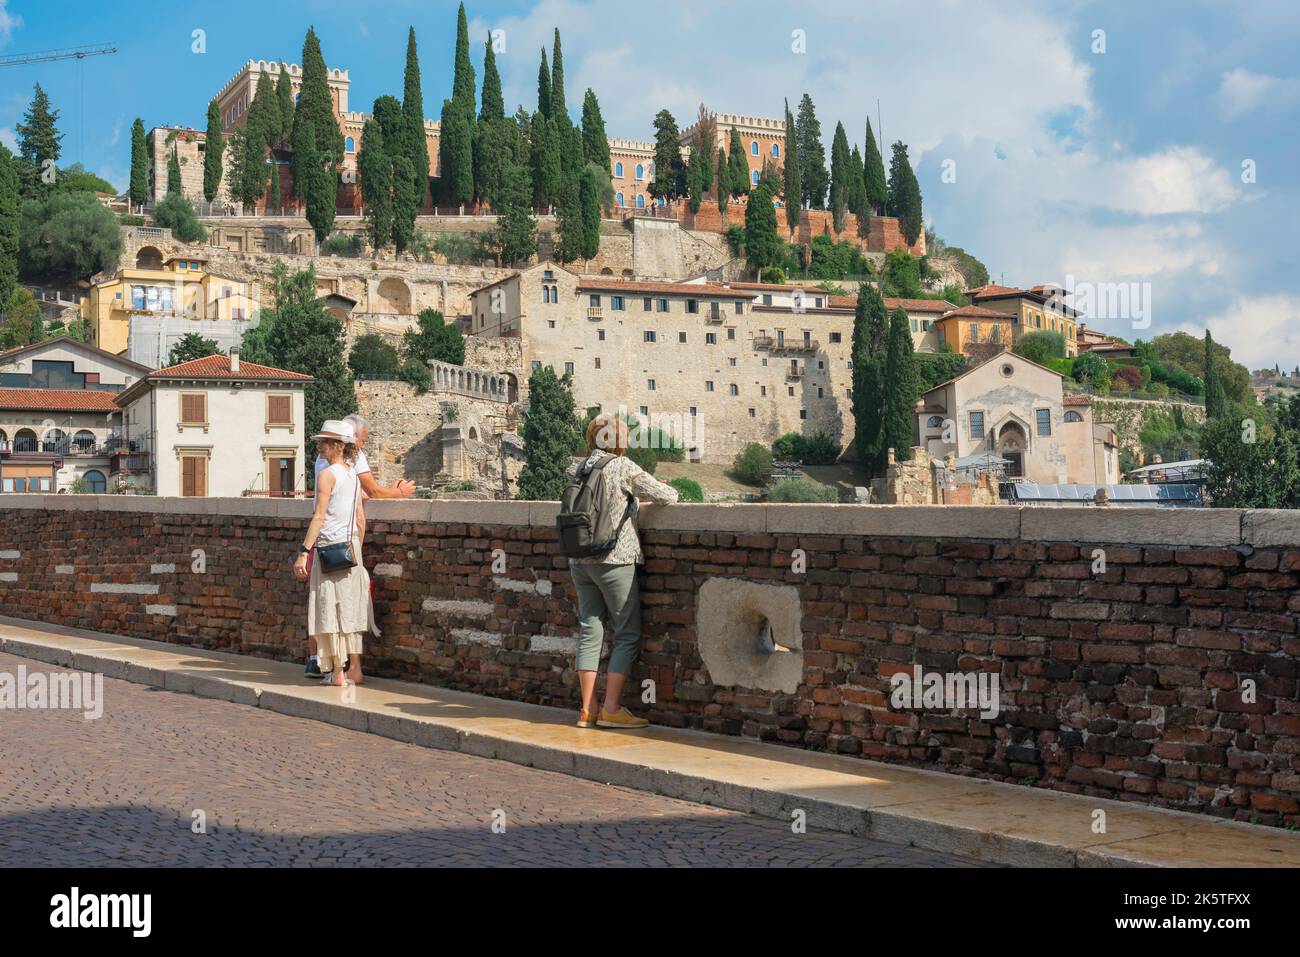 Ponte di Pietra bridge, view of people standing on the Ponte Pietra and looking towards San Pietro Hill on the north bank of the Adige, Verona, Italy Stock Photo